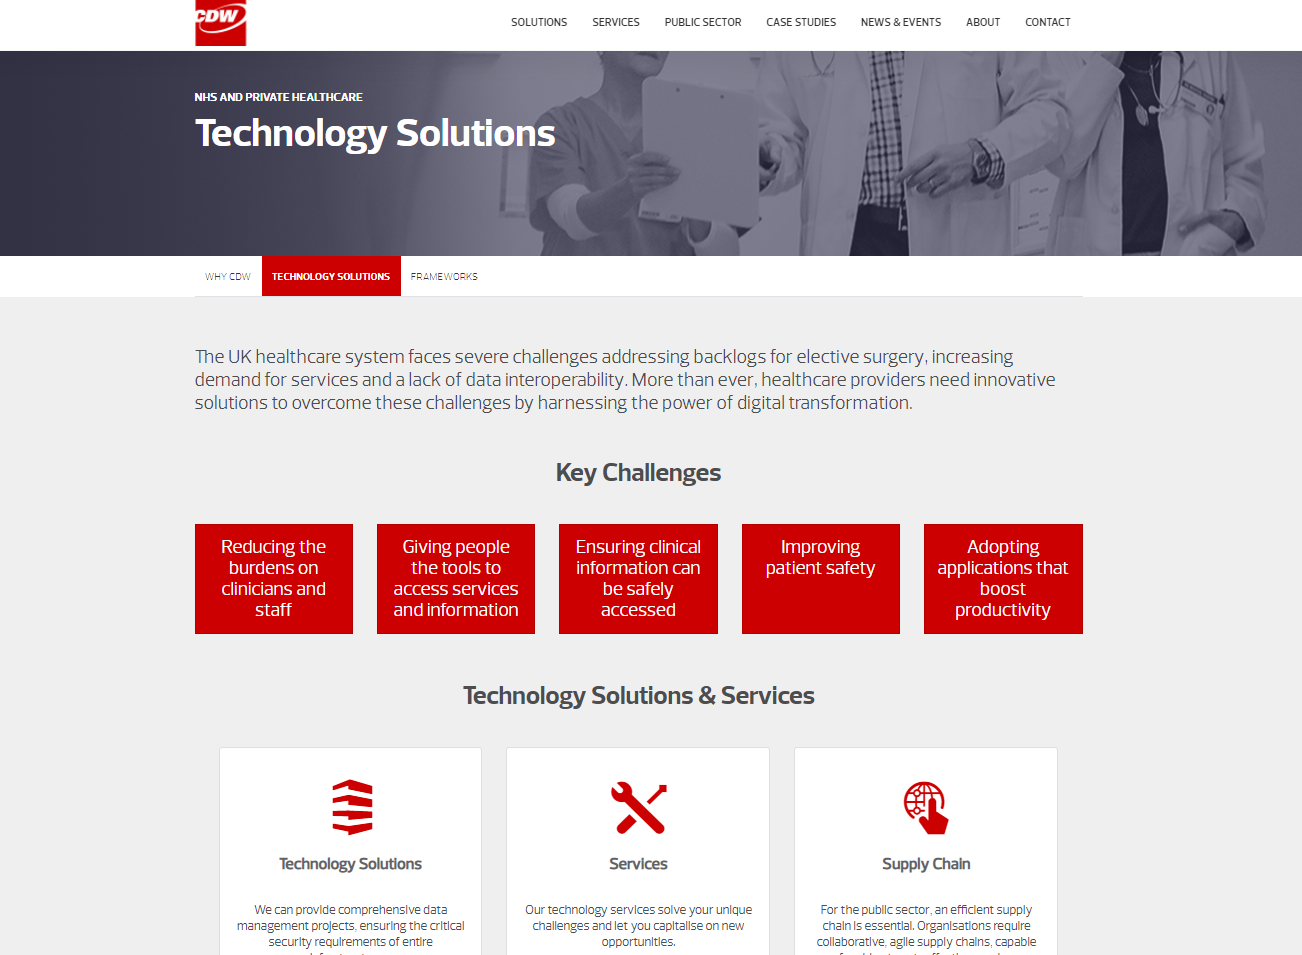 CDW web content - healthcare technology